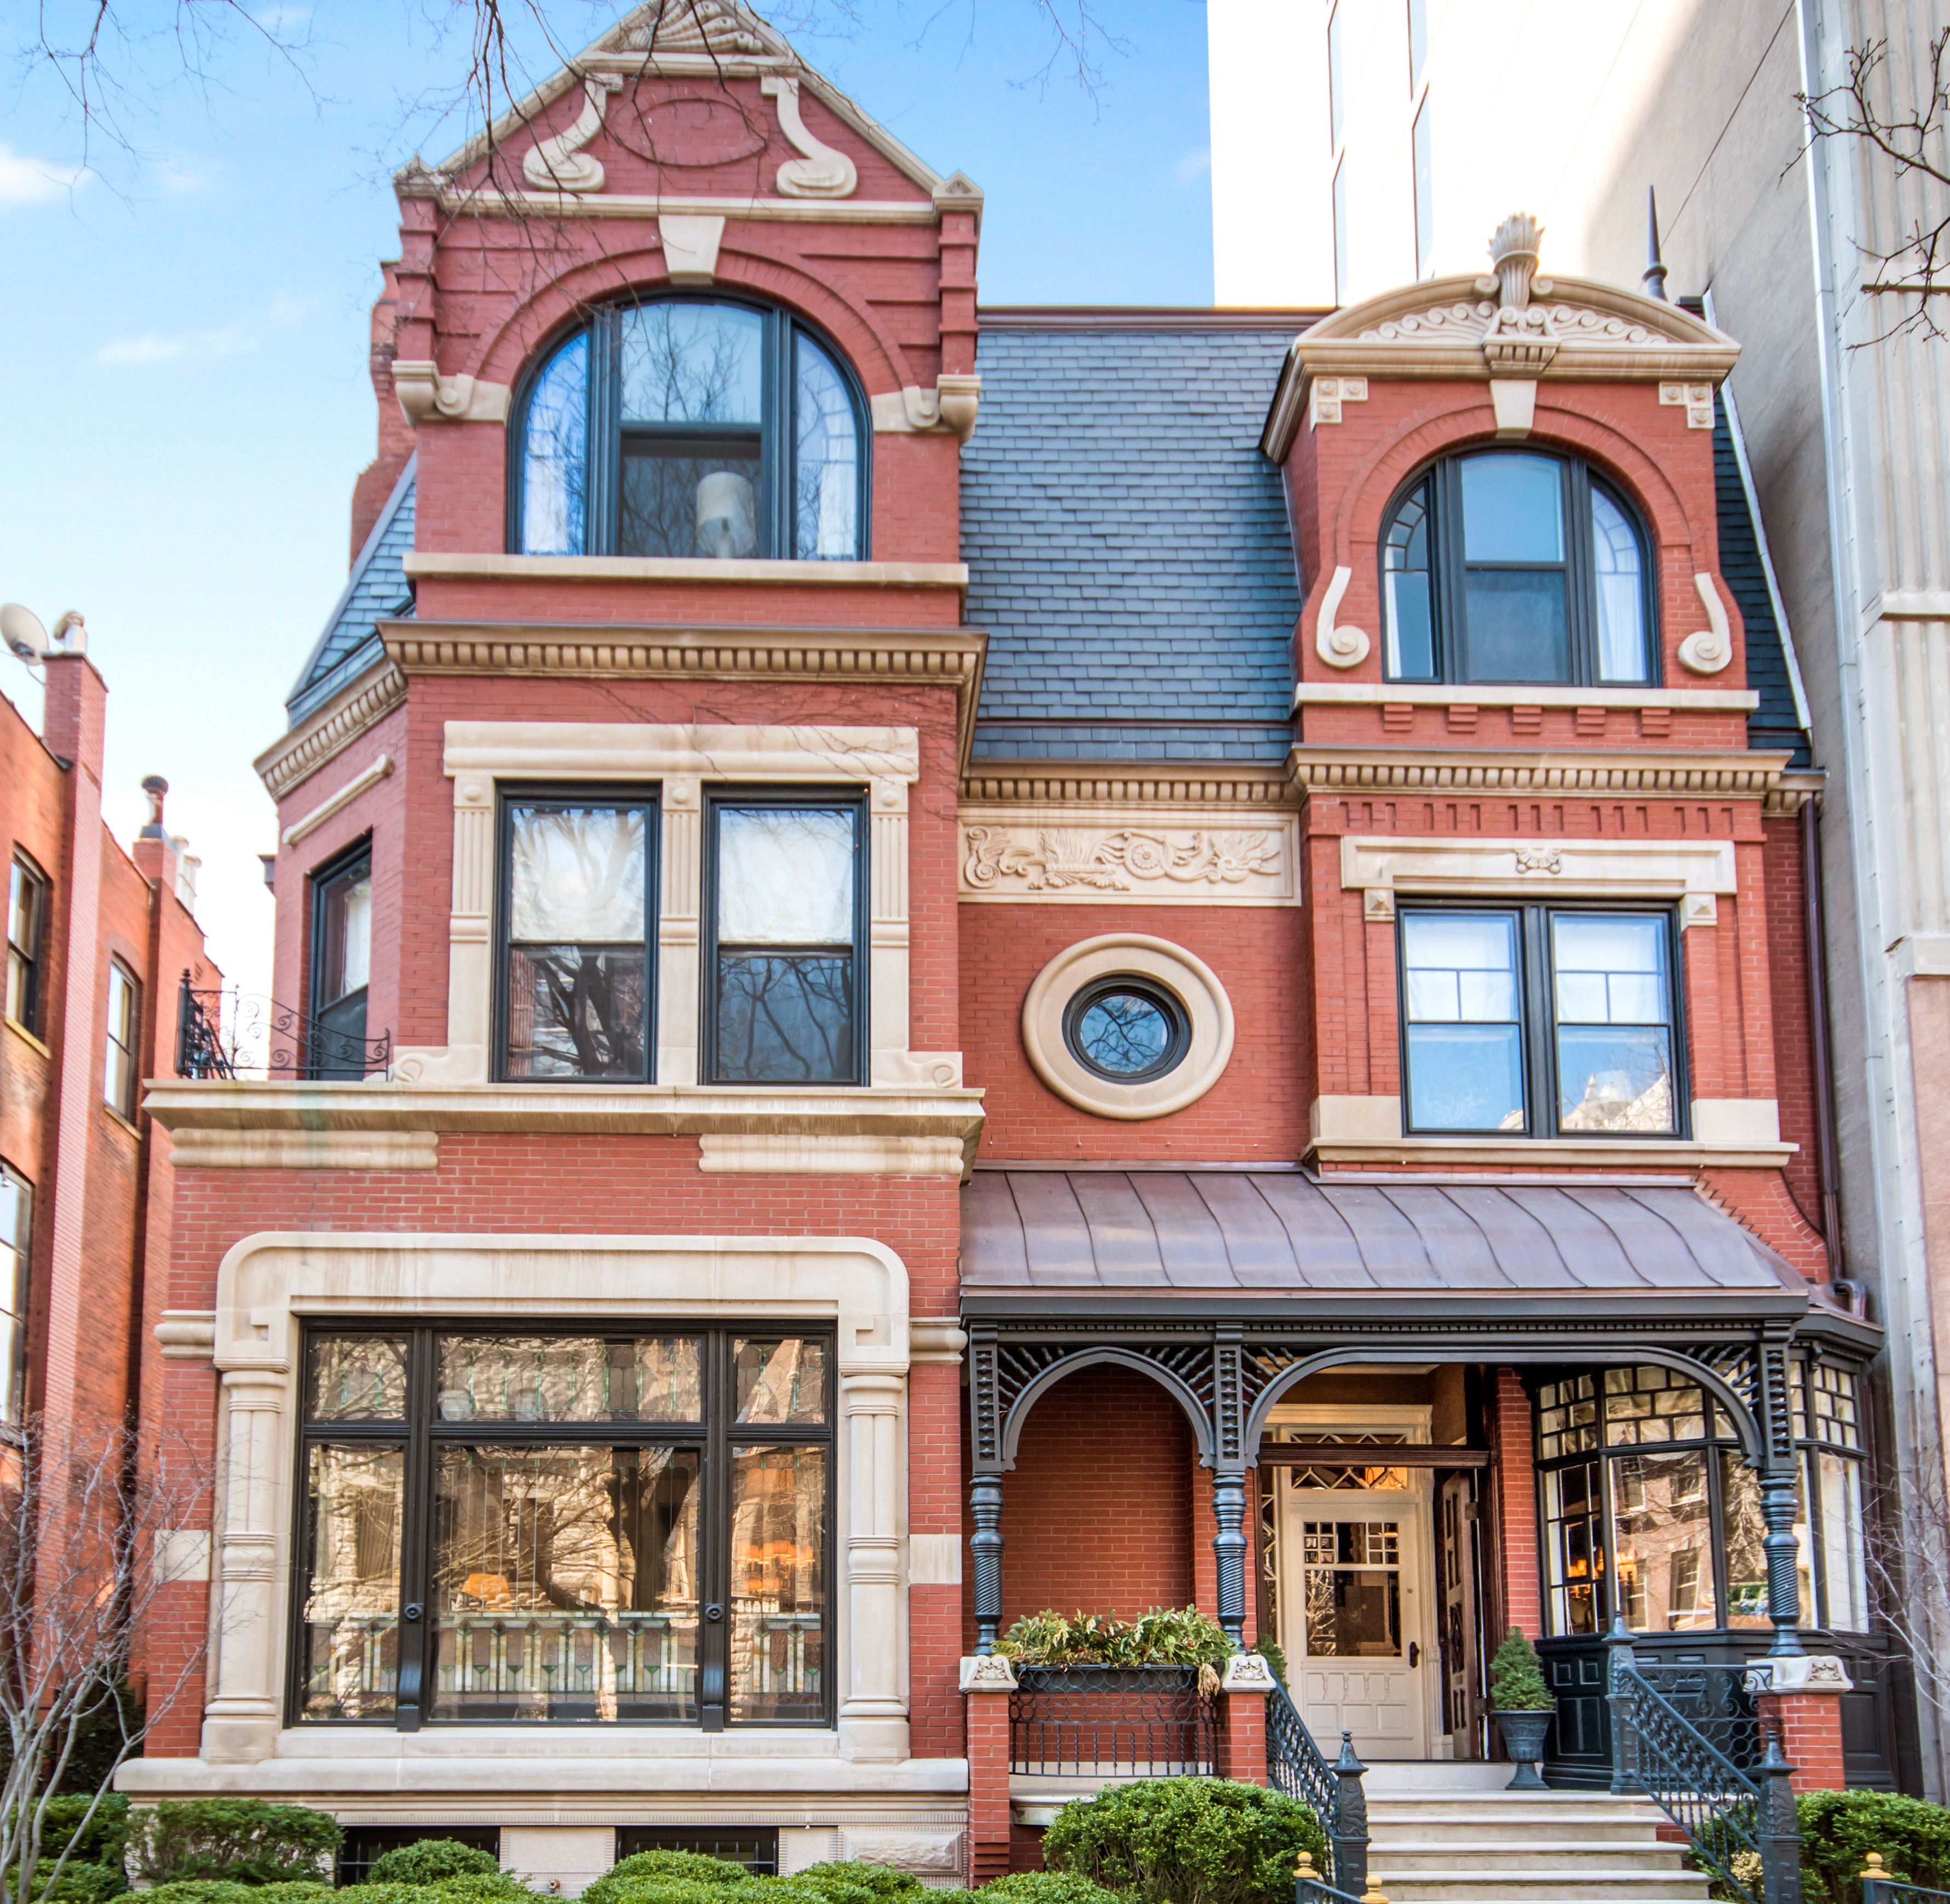 An three-story single-family home with historic trim, windows, moldings, and turrets. 